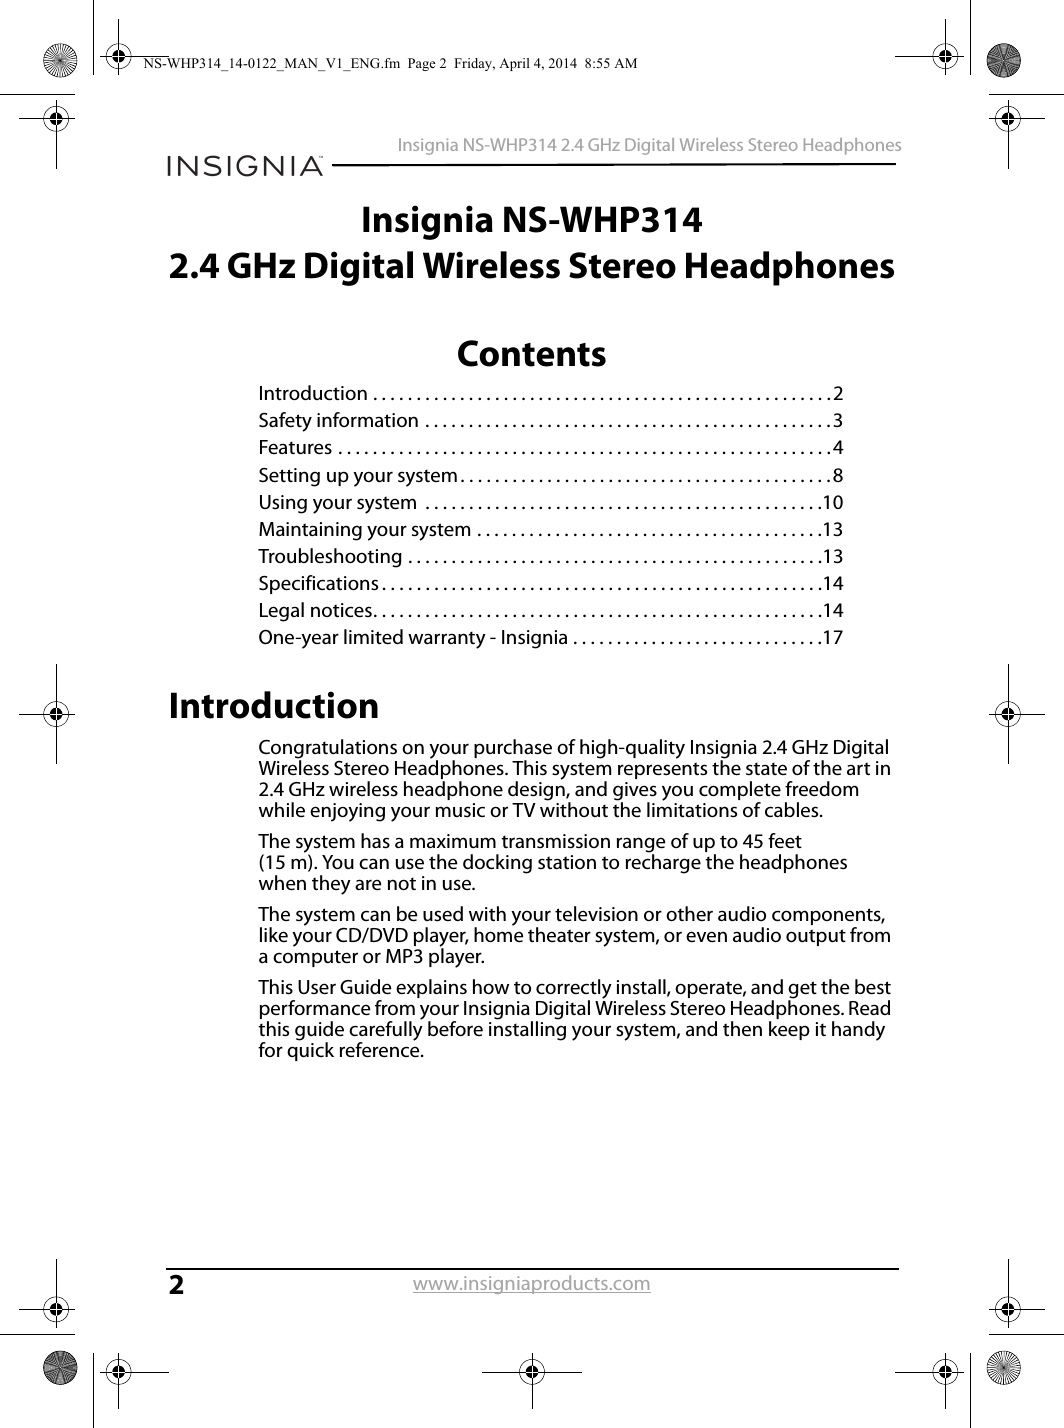 2Insignia NS-WHP314 2.4 GHz Digital Wireless Stereo Headphoneswww.insigniaproducts.comInsignia NS-WHP3142.4 GHz Digital Wireless Stereo HeadphonesContentsIntroduction . . . . . . . . . . . . . . . . . . . . . . . . . . . . . . . . . . . . . . . . . . . . . . . . . . . . .2Safety information . . . . . . . . . . . . . . . . . . . . . . . . . . . . . . . . . . . . . . . . . . . . . . .3Features . . . . . . . . . . . . . . . . . . . . . . . . . . . . . . . . . . . . . . . . . . . . . . . . . . . . . . . . .4Setting up your system. . . . . . . . . . . . . . . . . . . . . . . . . . . . . . . . . . . . . . . . . . .8Using your system  . . . . . . . . . . . . . . . . . . . . . . . . . . . . . . . . . . . . . . . . . . . . . .10Maintaining your system . . . . . . . . . . . . . . . . . . . . . . . . . . . . . . . . . . . . . . . .13Troubleshooting . . . . . . . . . . . . . . . . . . . . . . . . . . . . . . . . . . . . . . . . . . . . . . . .13Specifications . . . . . . . . . . . . . . . . . . . . . . . . . . . . . . . . . . . . . . . . . . . . . . . . . . .14Legal notices. . . . . . . . . . . . . . . . . . . . . . . . . . . . . . . . . . . . . . . . . . . . . . . . . . . .14One-year limited warranty - Insignia . . . . . . . . . . . . . . . . . . . . . . . . . . . . .17IntroductionCongratulations on your purchase of high-quality Insignia 2.4 GHz Digital Wireless Stereo Headphones. This system represents the state of the art in 2.4 GHz wireless headphone design, and gives you complete freedom while enjoying your music or TV without the limitations of cables.The system has a maximum transmission range of up to 45 feet (15 m). You can use the docking station to recharge the headphones when they are not in use. The system can be used with your television or other audio components, like your CD/DVD player, home theater system, or even audio output from a computer or MP3 player. This User Guide explains how to correctly install, operate, and get the best performance from your Insignia Digital Wireless Stereo Headphones. Read this guide carefully before installing your system, and then keep it handy for quick reference.NS-WHP314_14-0122_MAN_V1_ENG.fm  Page 2  Friday, April 4, 2014  8:55 AM